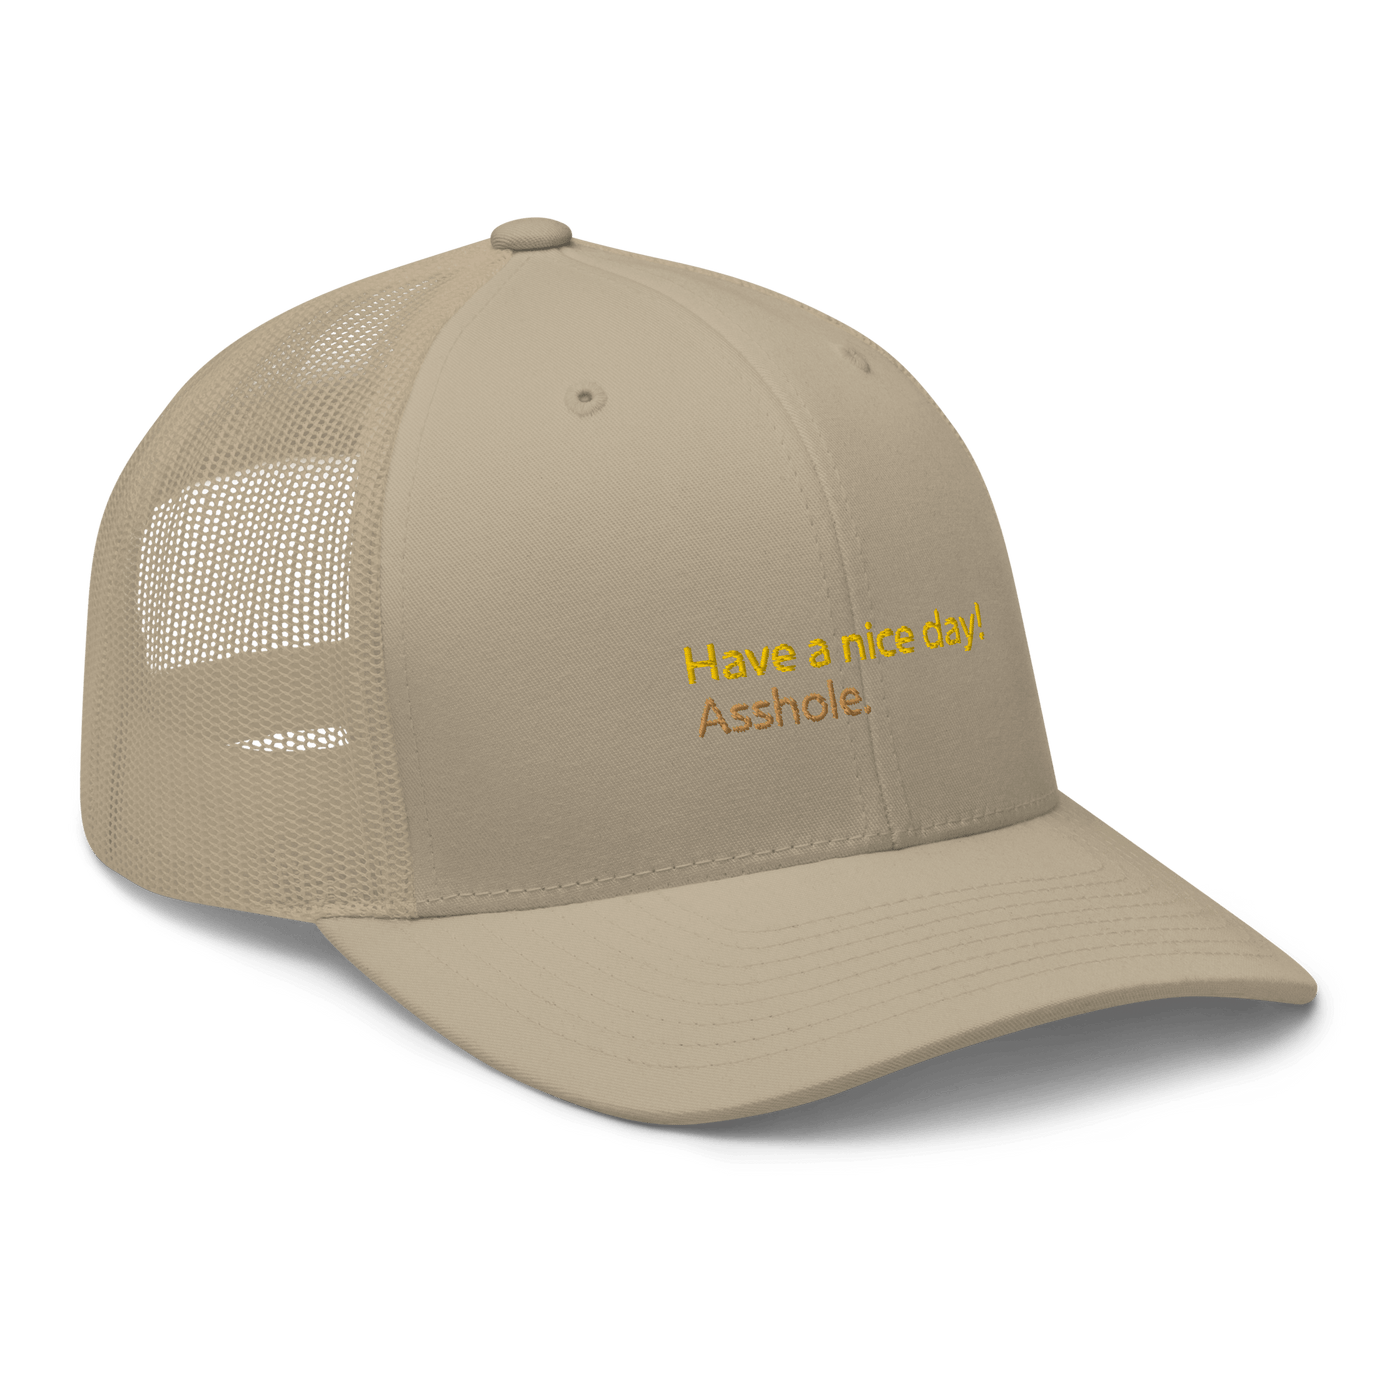 Have a nice day! (asshole) Trucker Cap - Khaki - - Just Another Cap Store